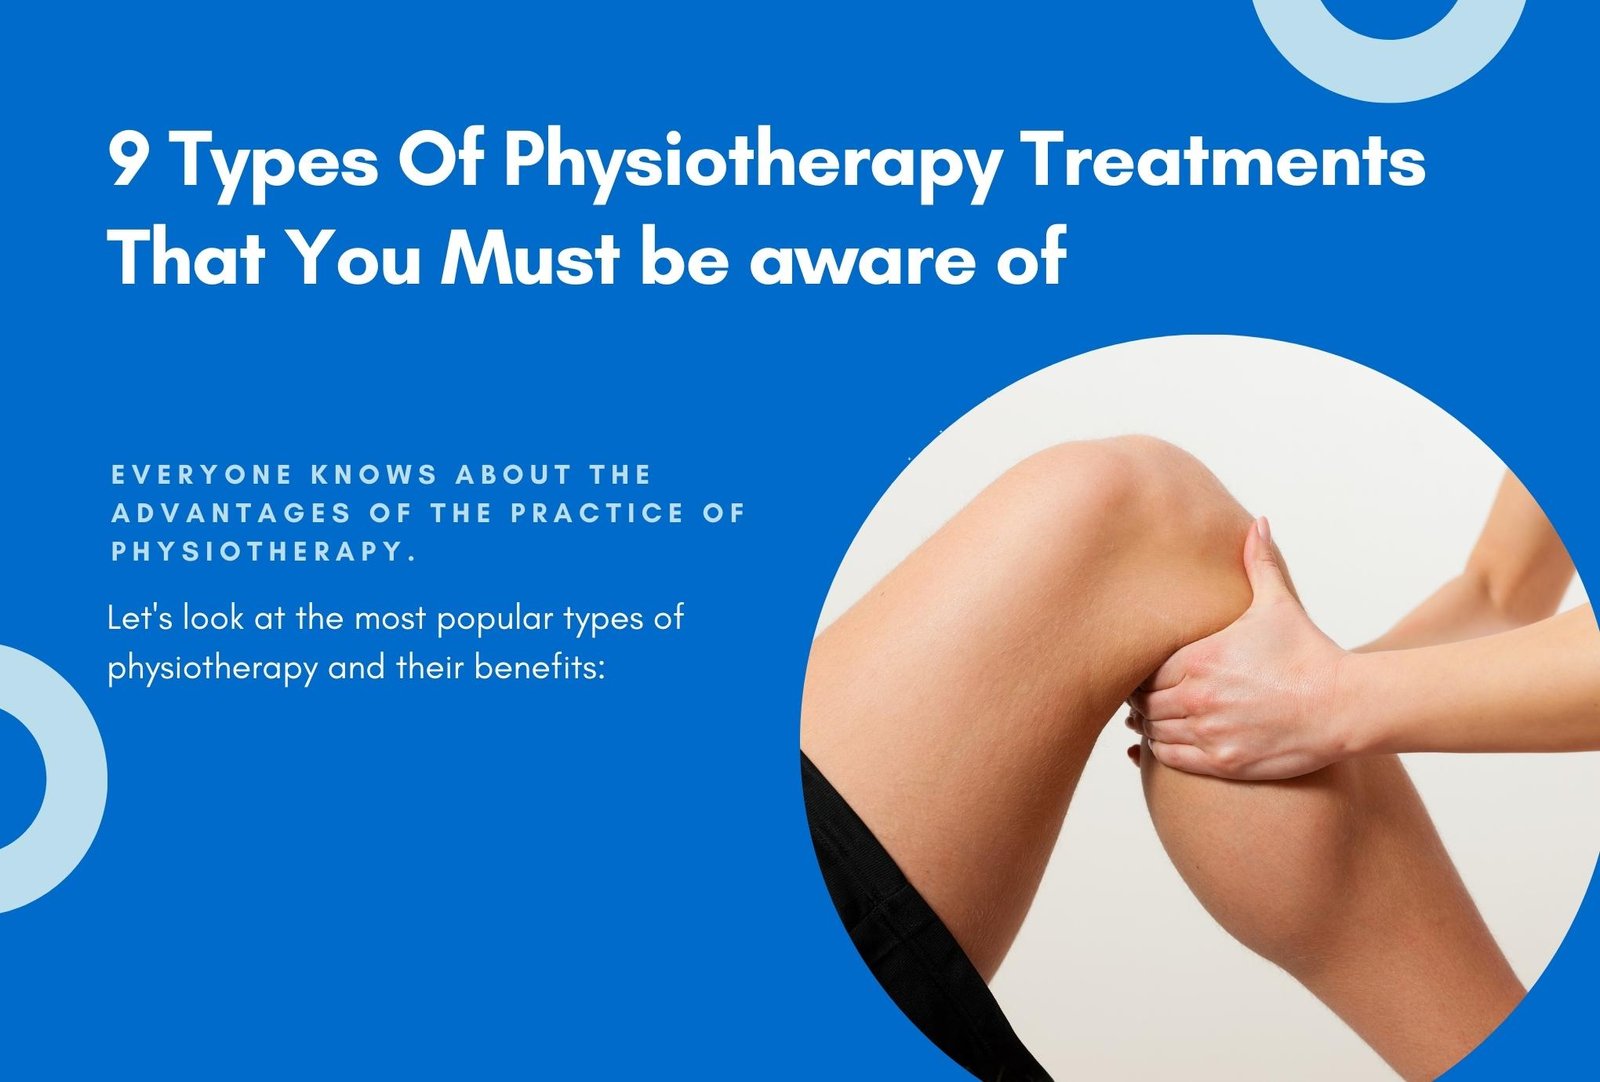 246539-types-of-physiotherapy-treatments-that-you-must-be-aware-of.jpg